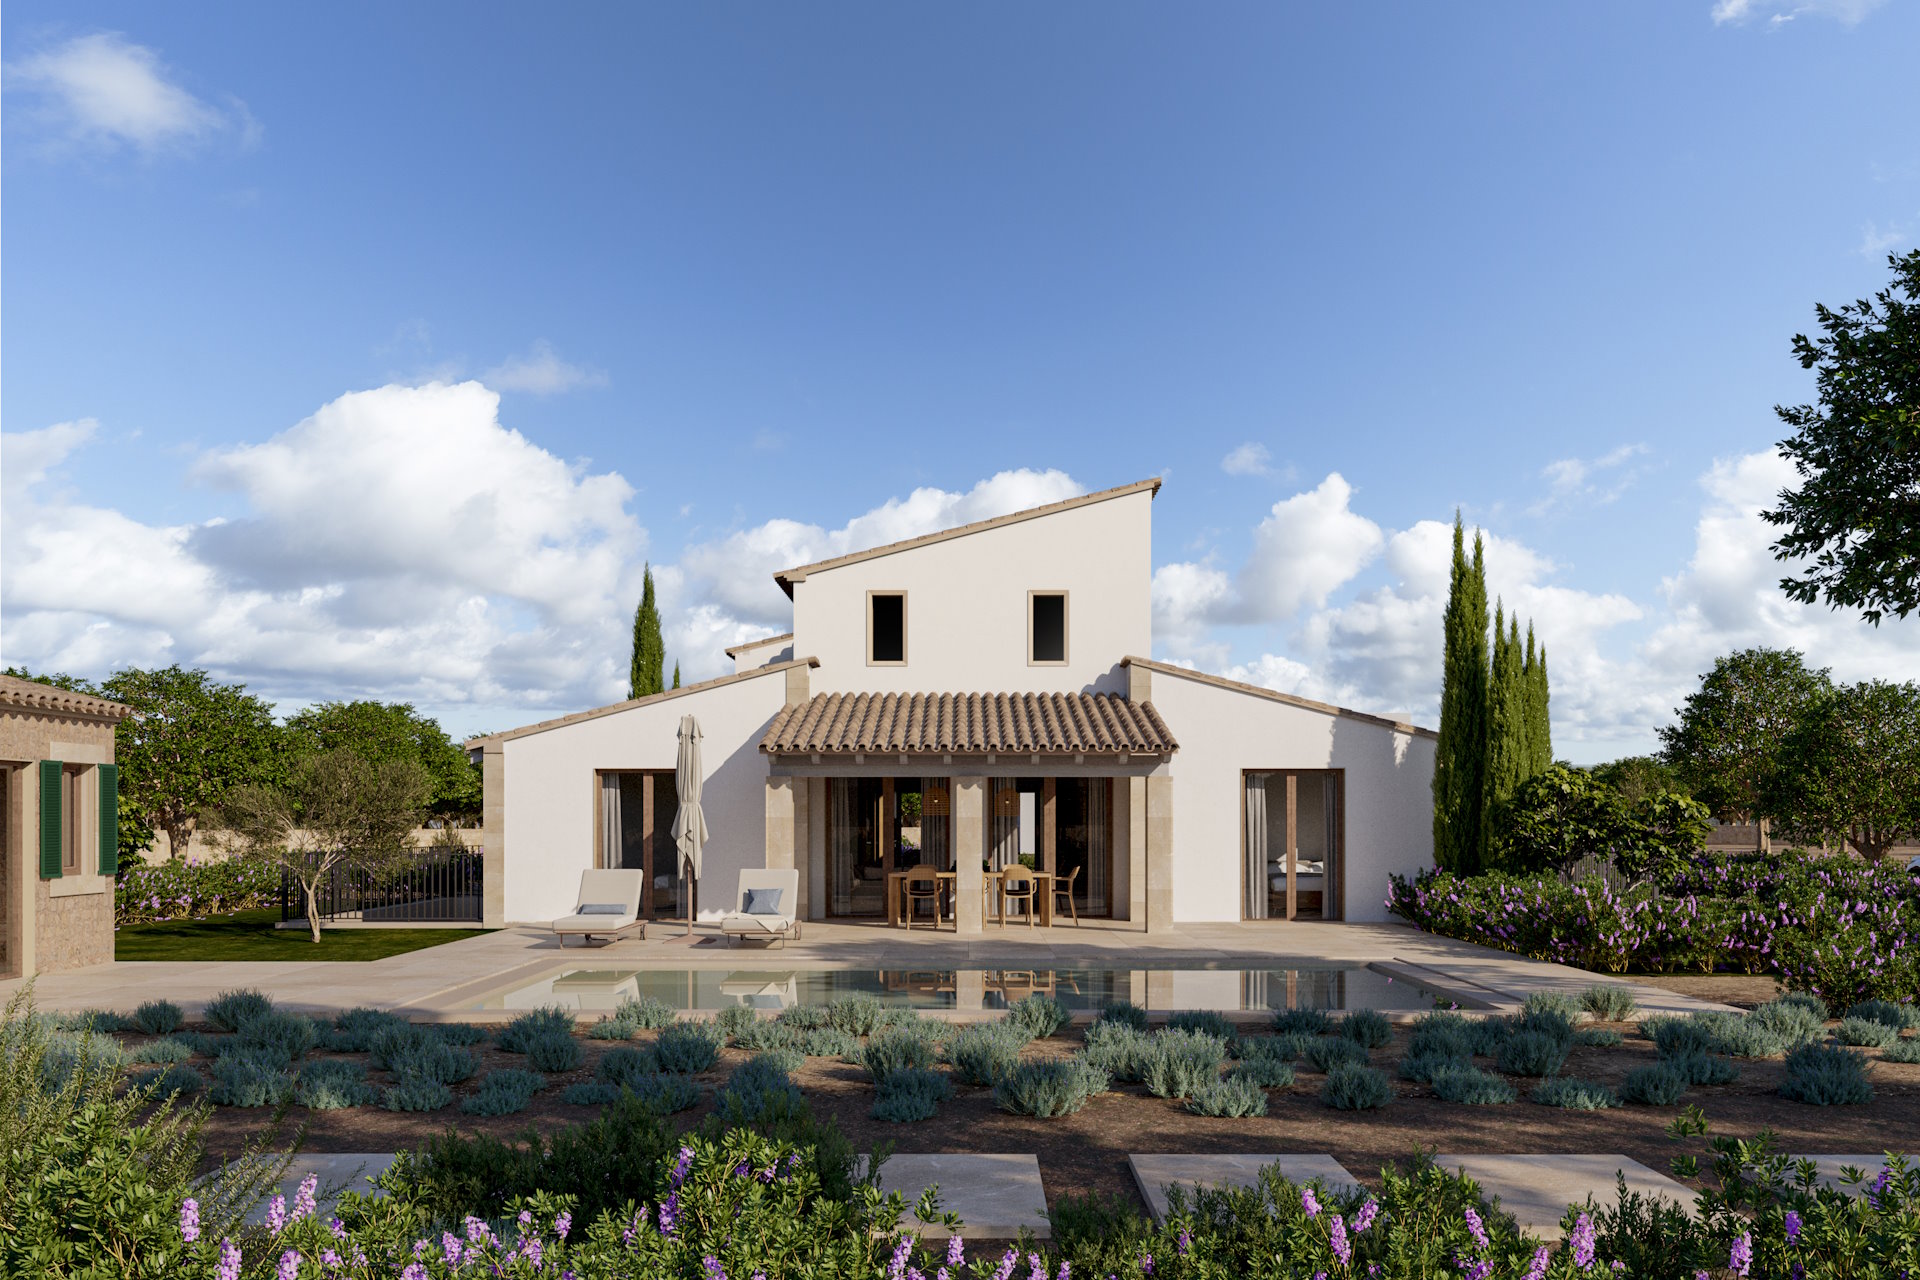 Newly built finca in the Santa Maria wine-growing region with 4 bedrooms, high ceilings and saltwater pool